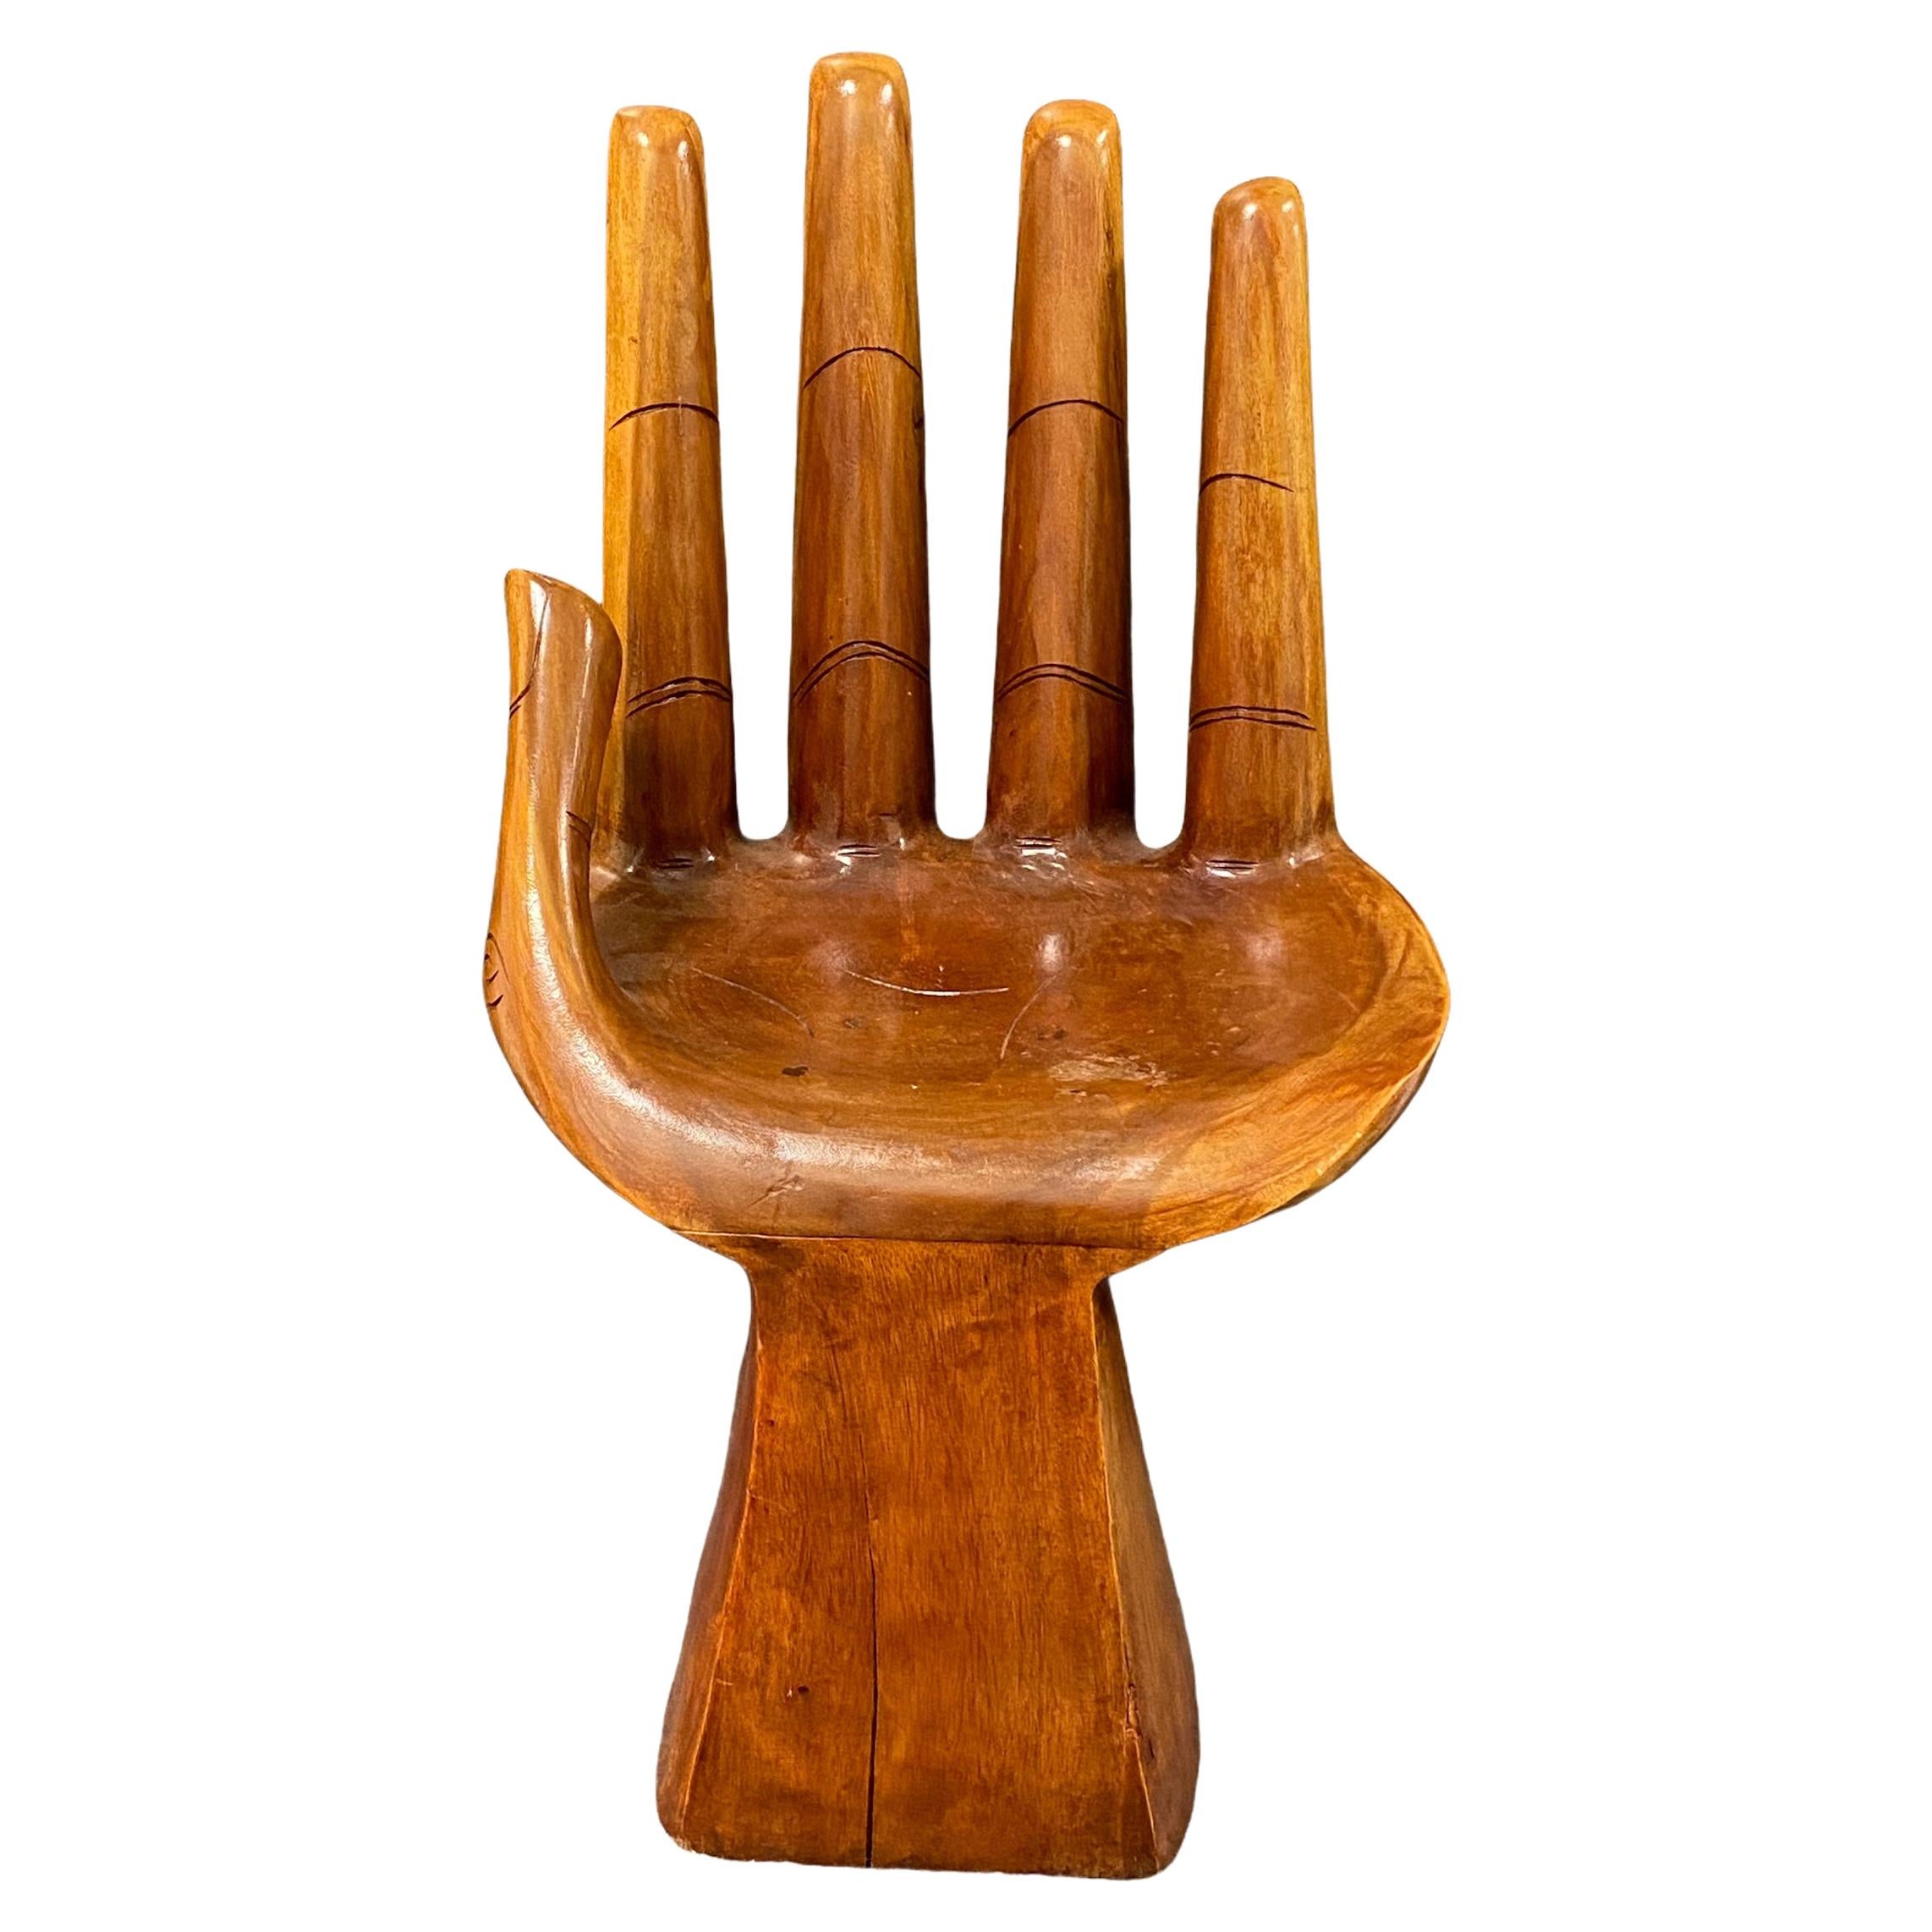 Carved Hand Chair in the Style of Pedro Friedeberg, circa 1970s